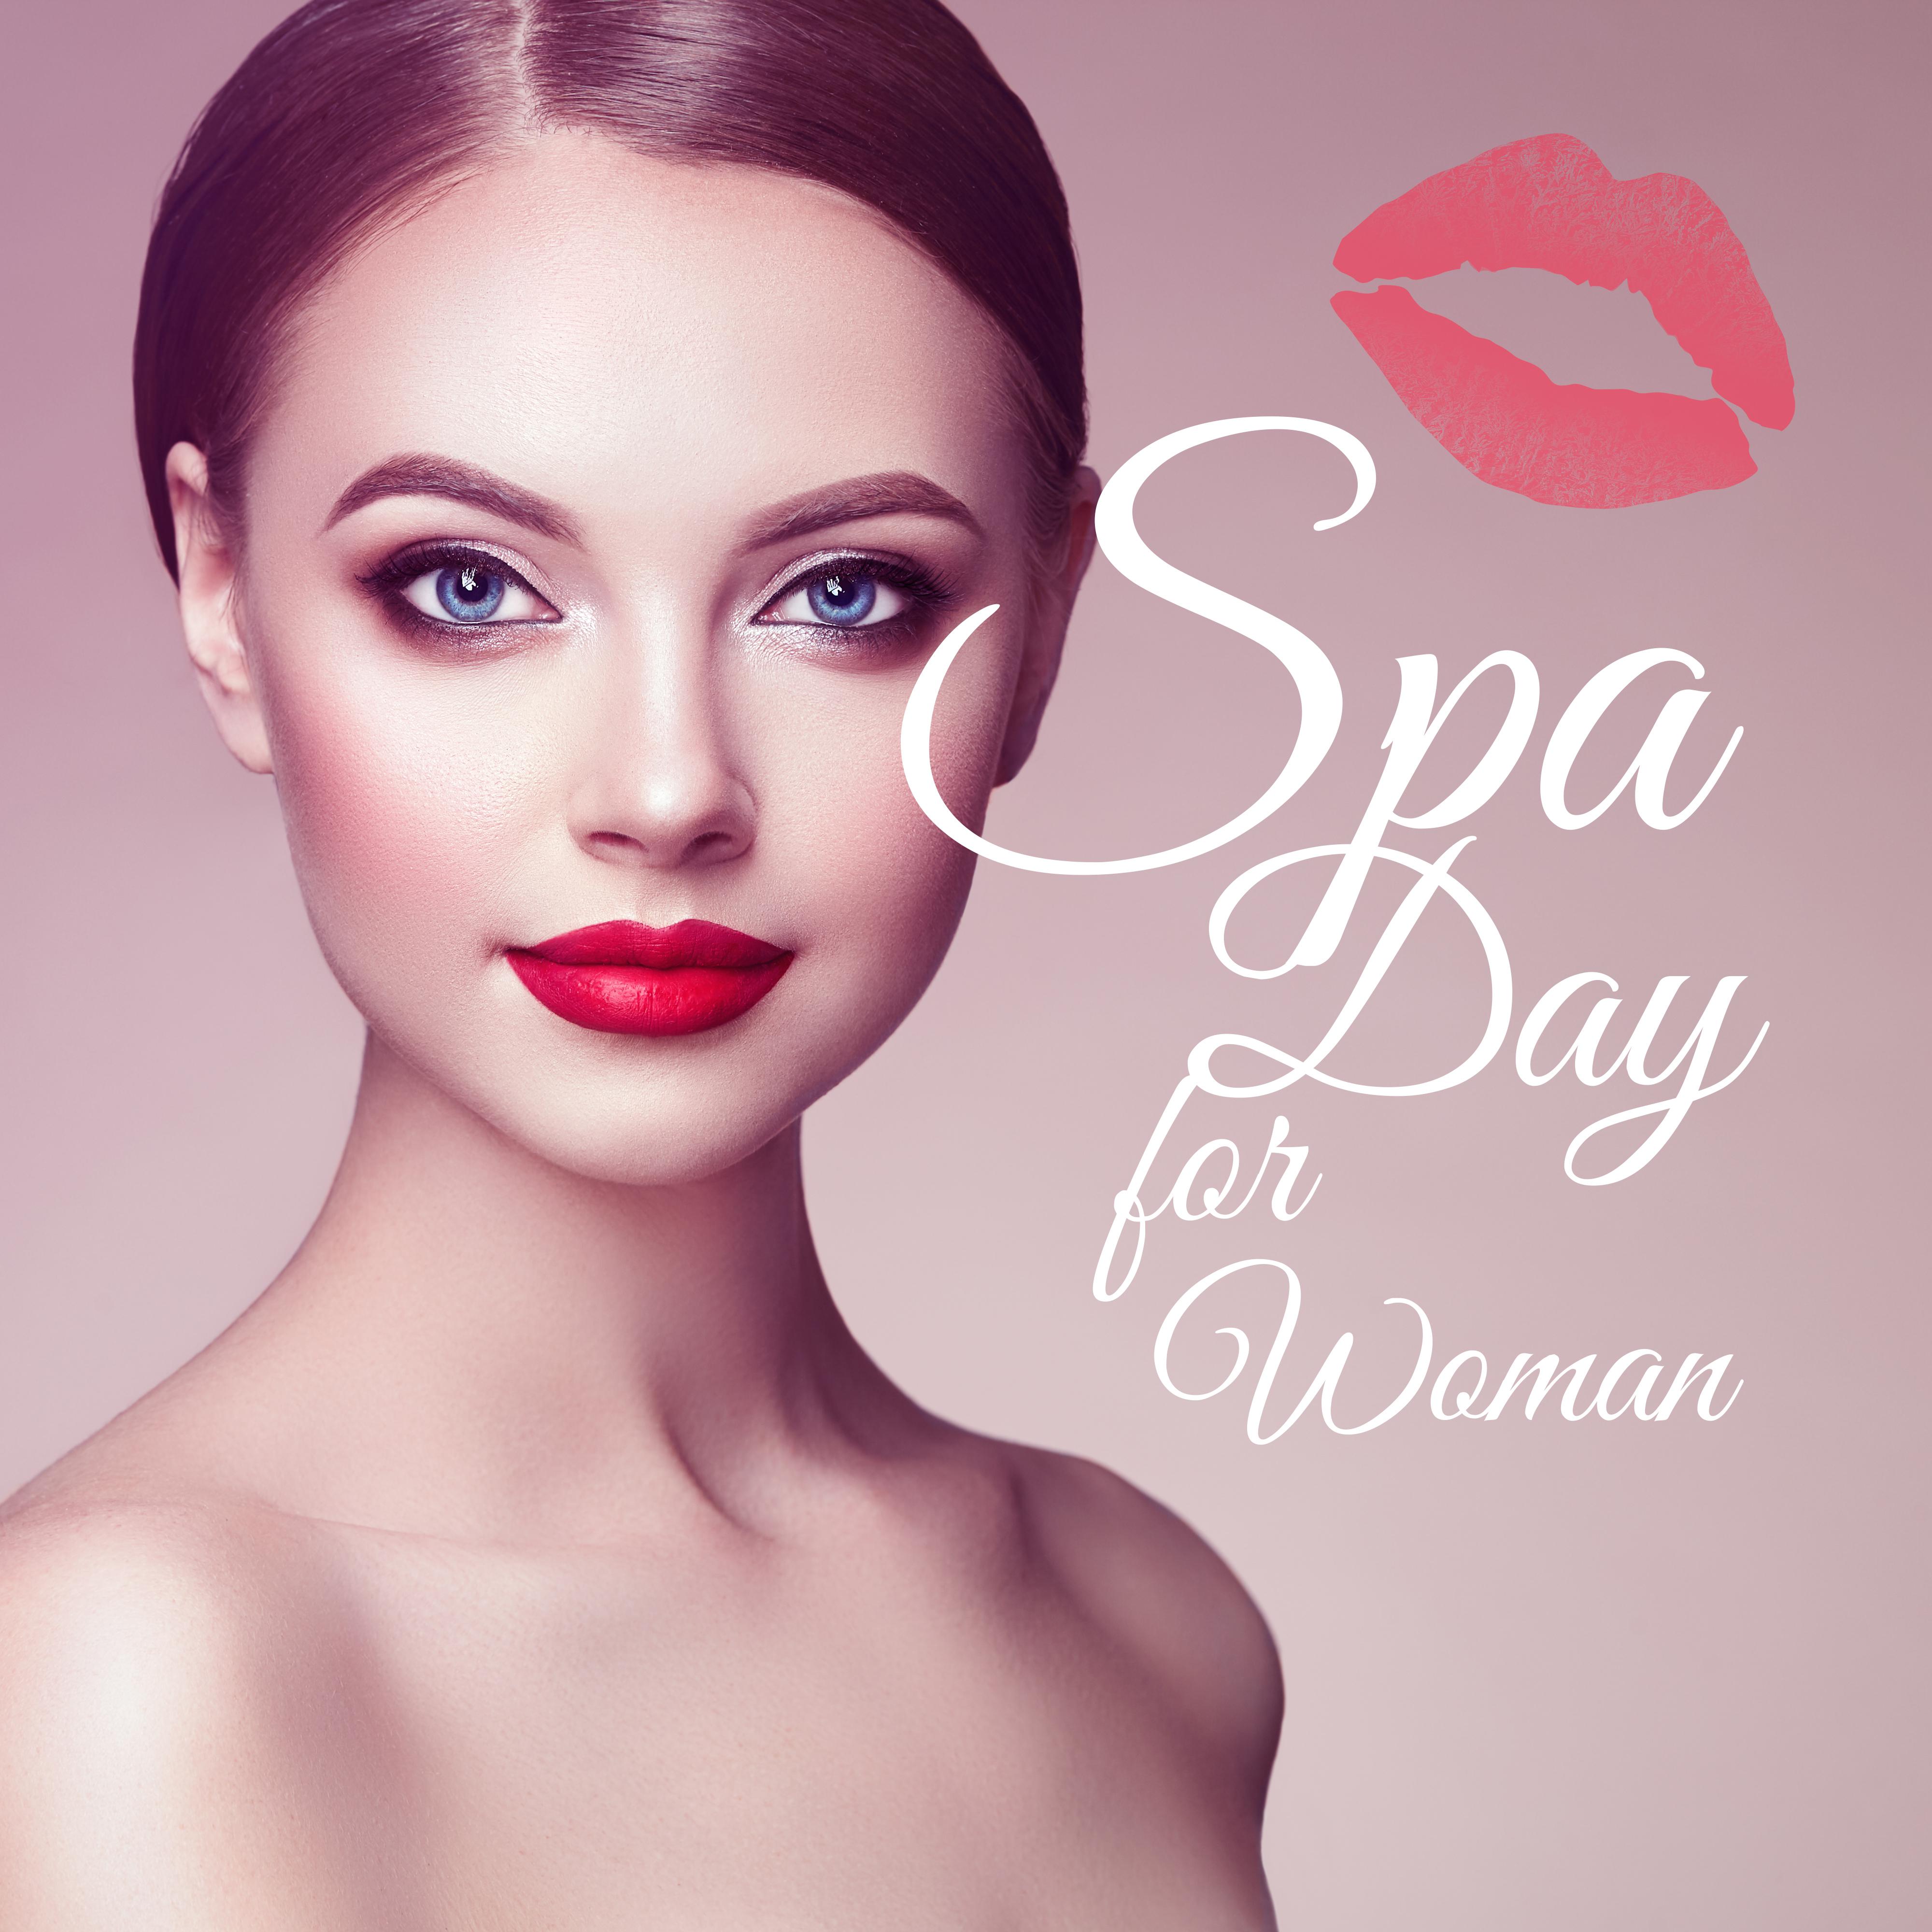 Spa Day for Woman: best Music for Your Beauty